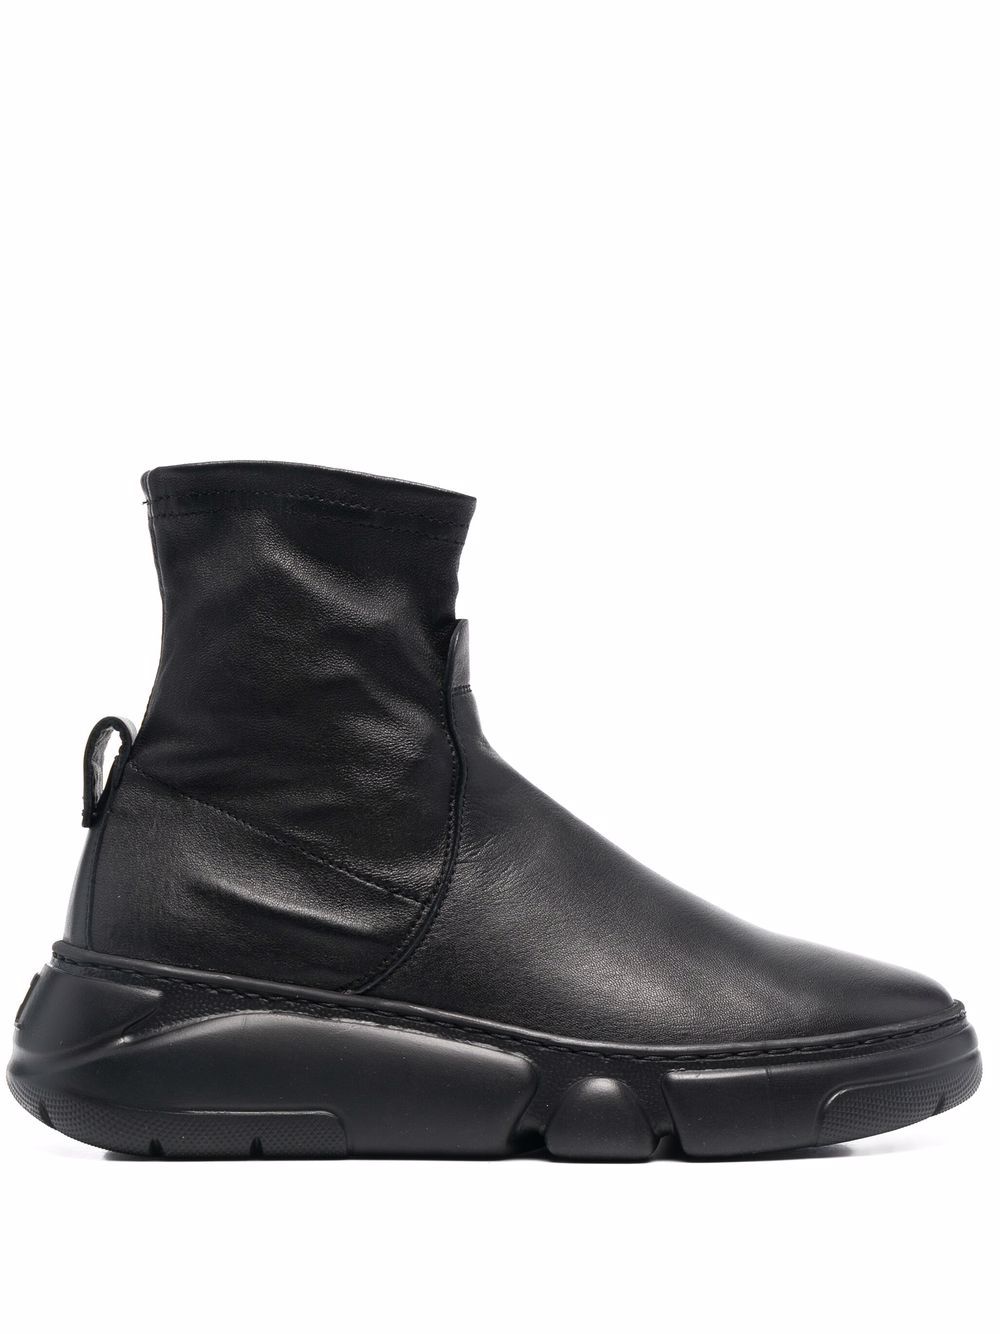 AGL Miledy ankle leather boots - Black von AGL